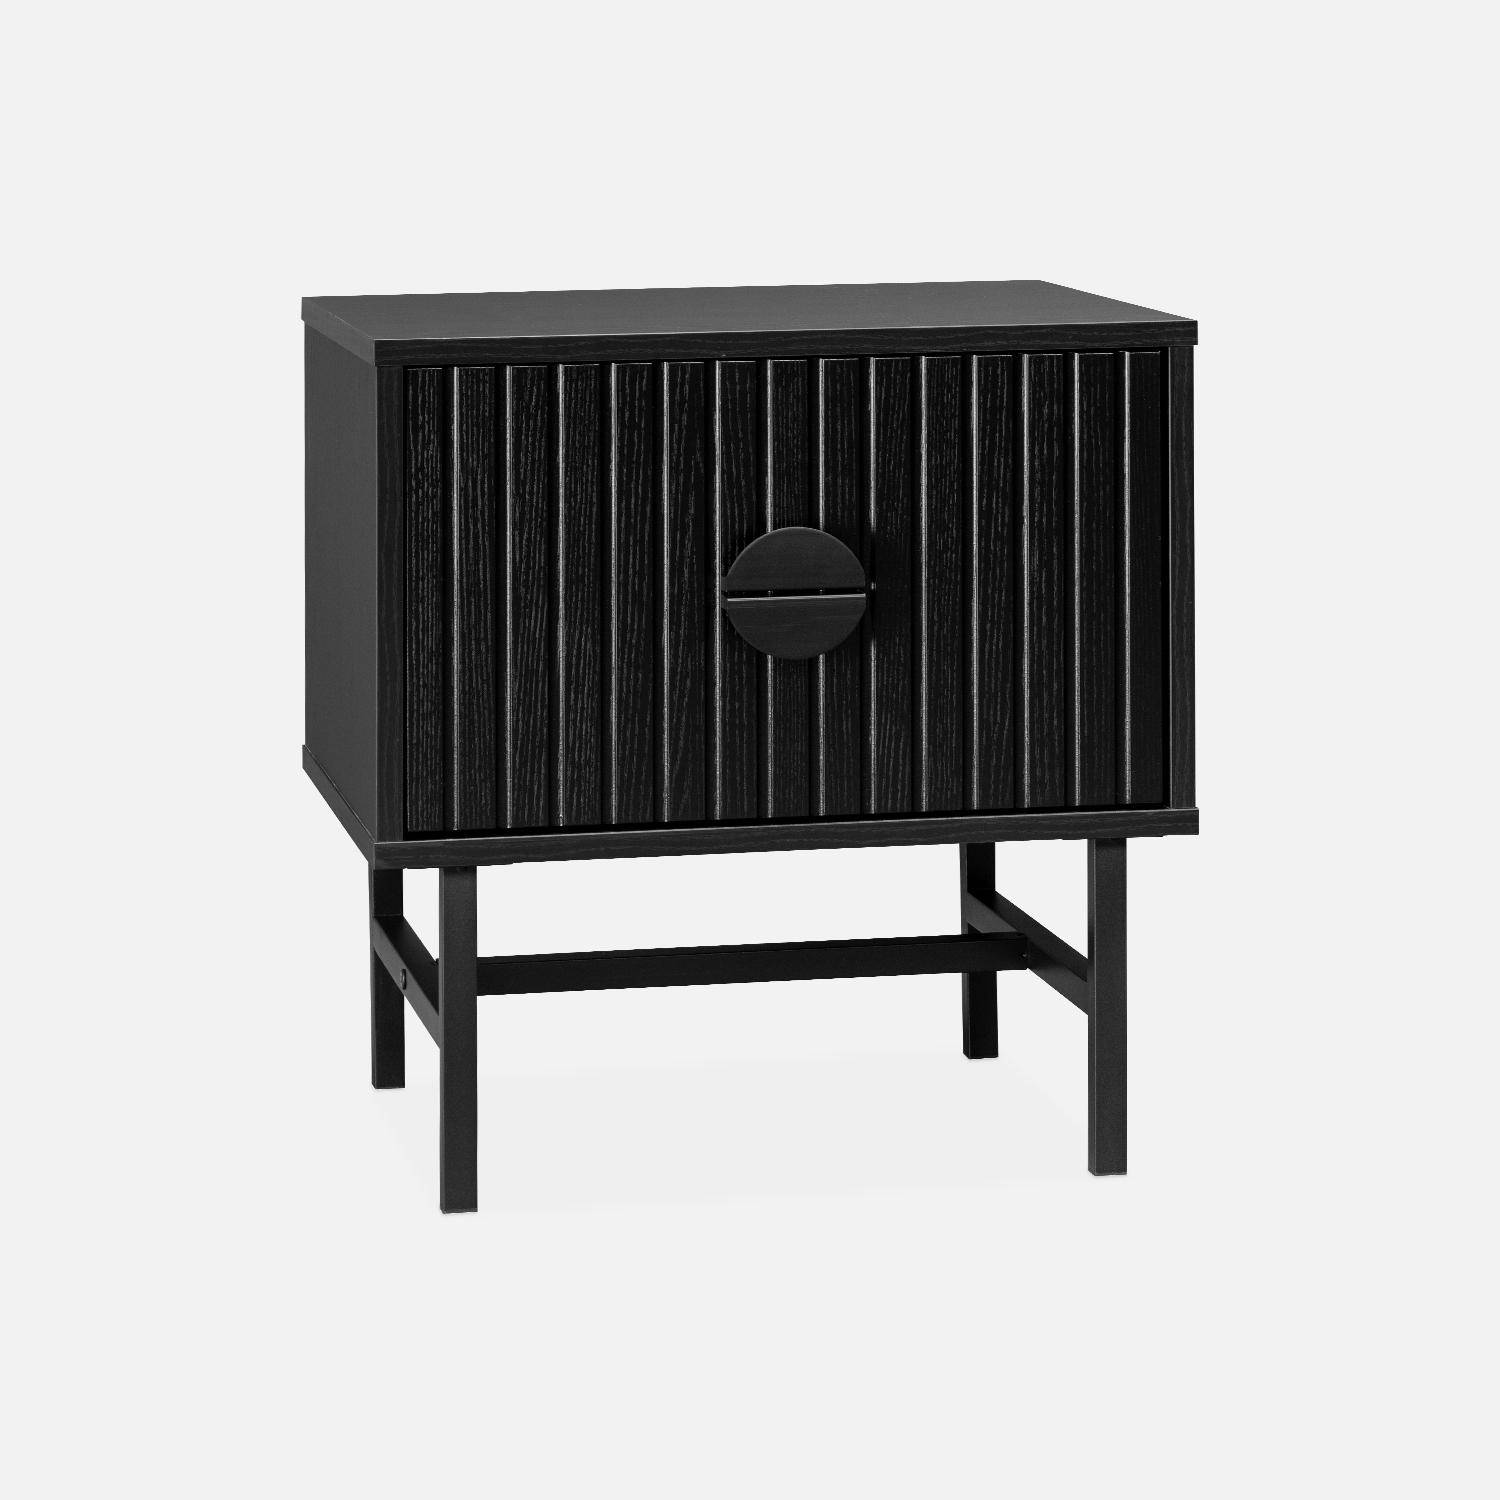 Bedside table with one drawer, ridged effect, industrial style, 48x39x50.3cm - Bazalt - Black Photo3